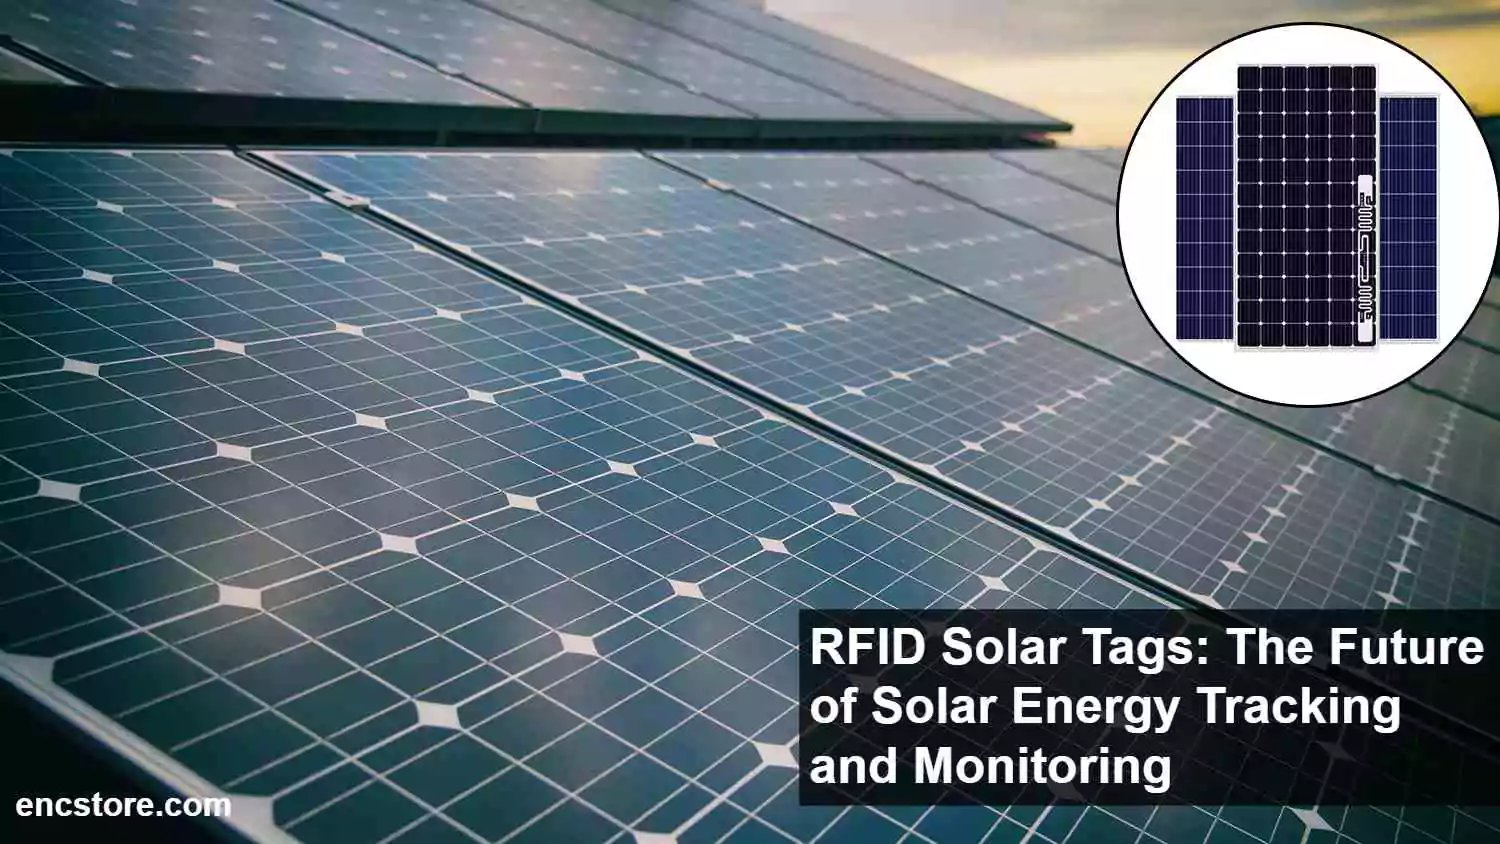 RFID Solar Tags: The Future of Solar Energy Tracking and Monitoring